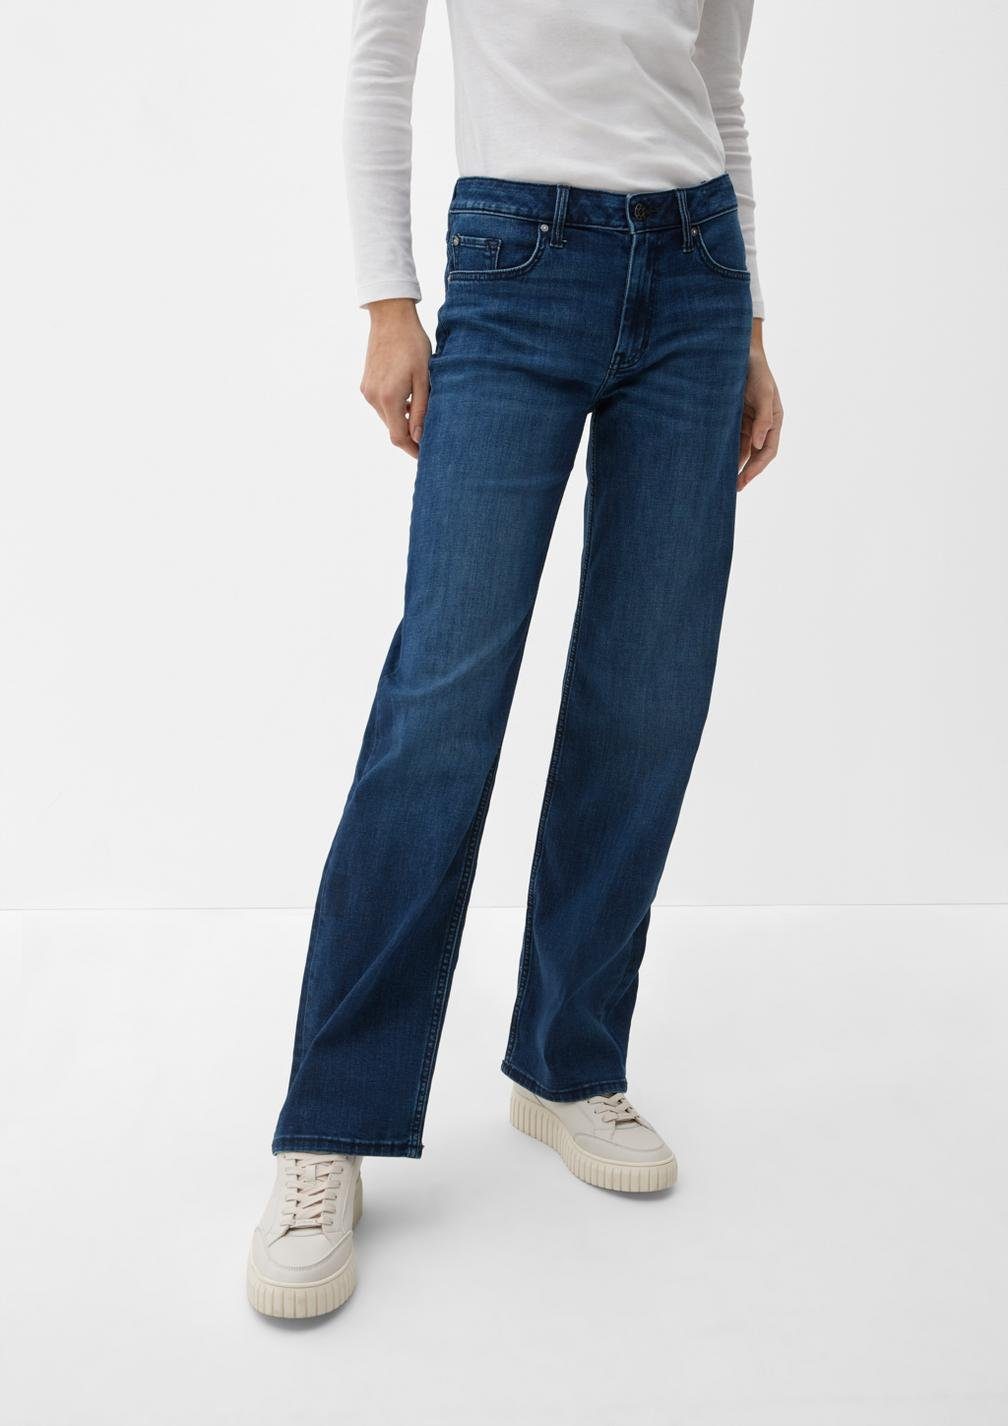 Comfort-fit-Jeans Waschung, Mid / Straight mit rise KAROLIN / tiefblau Fit s.Oliver Leg leichter Relaxed